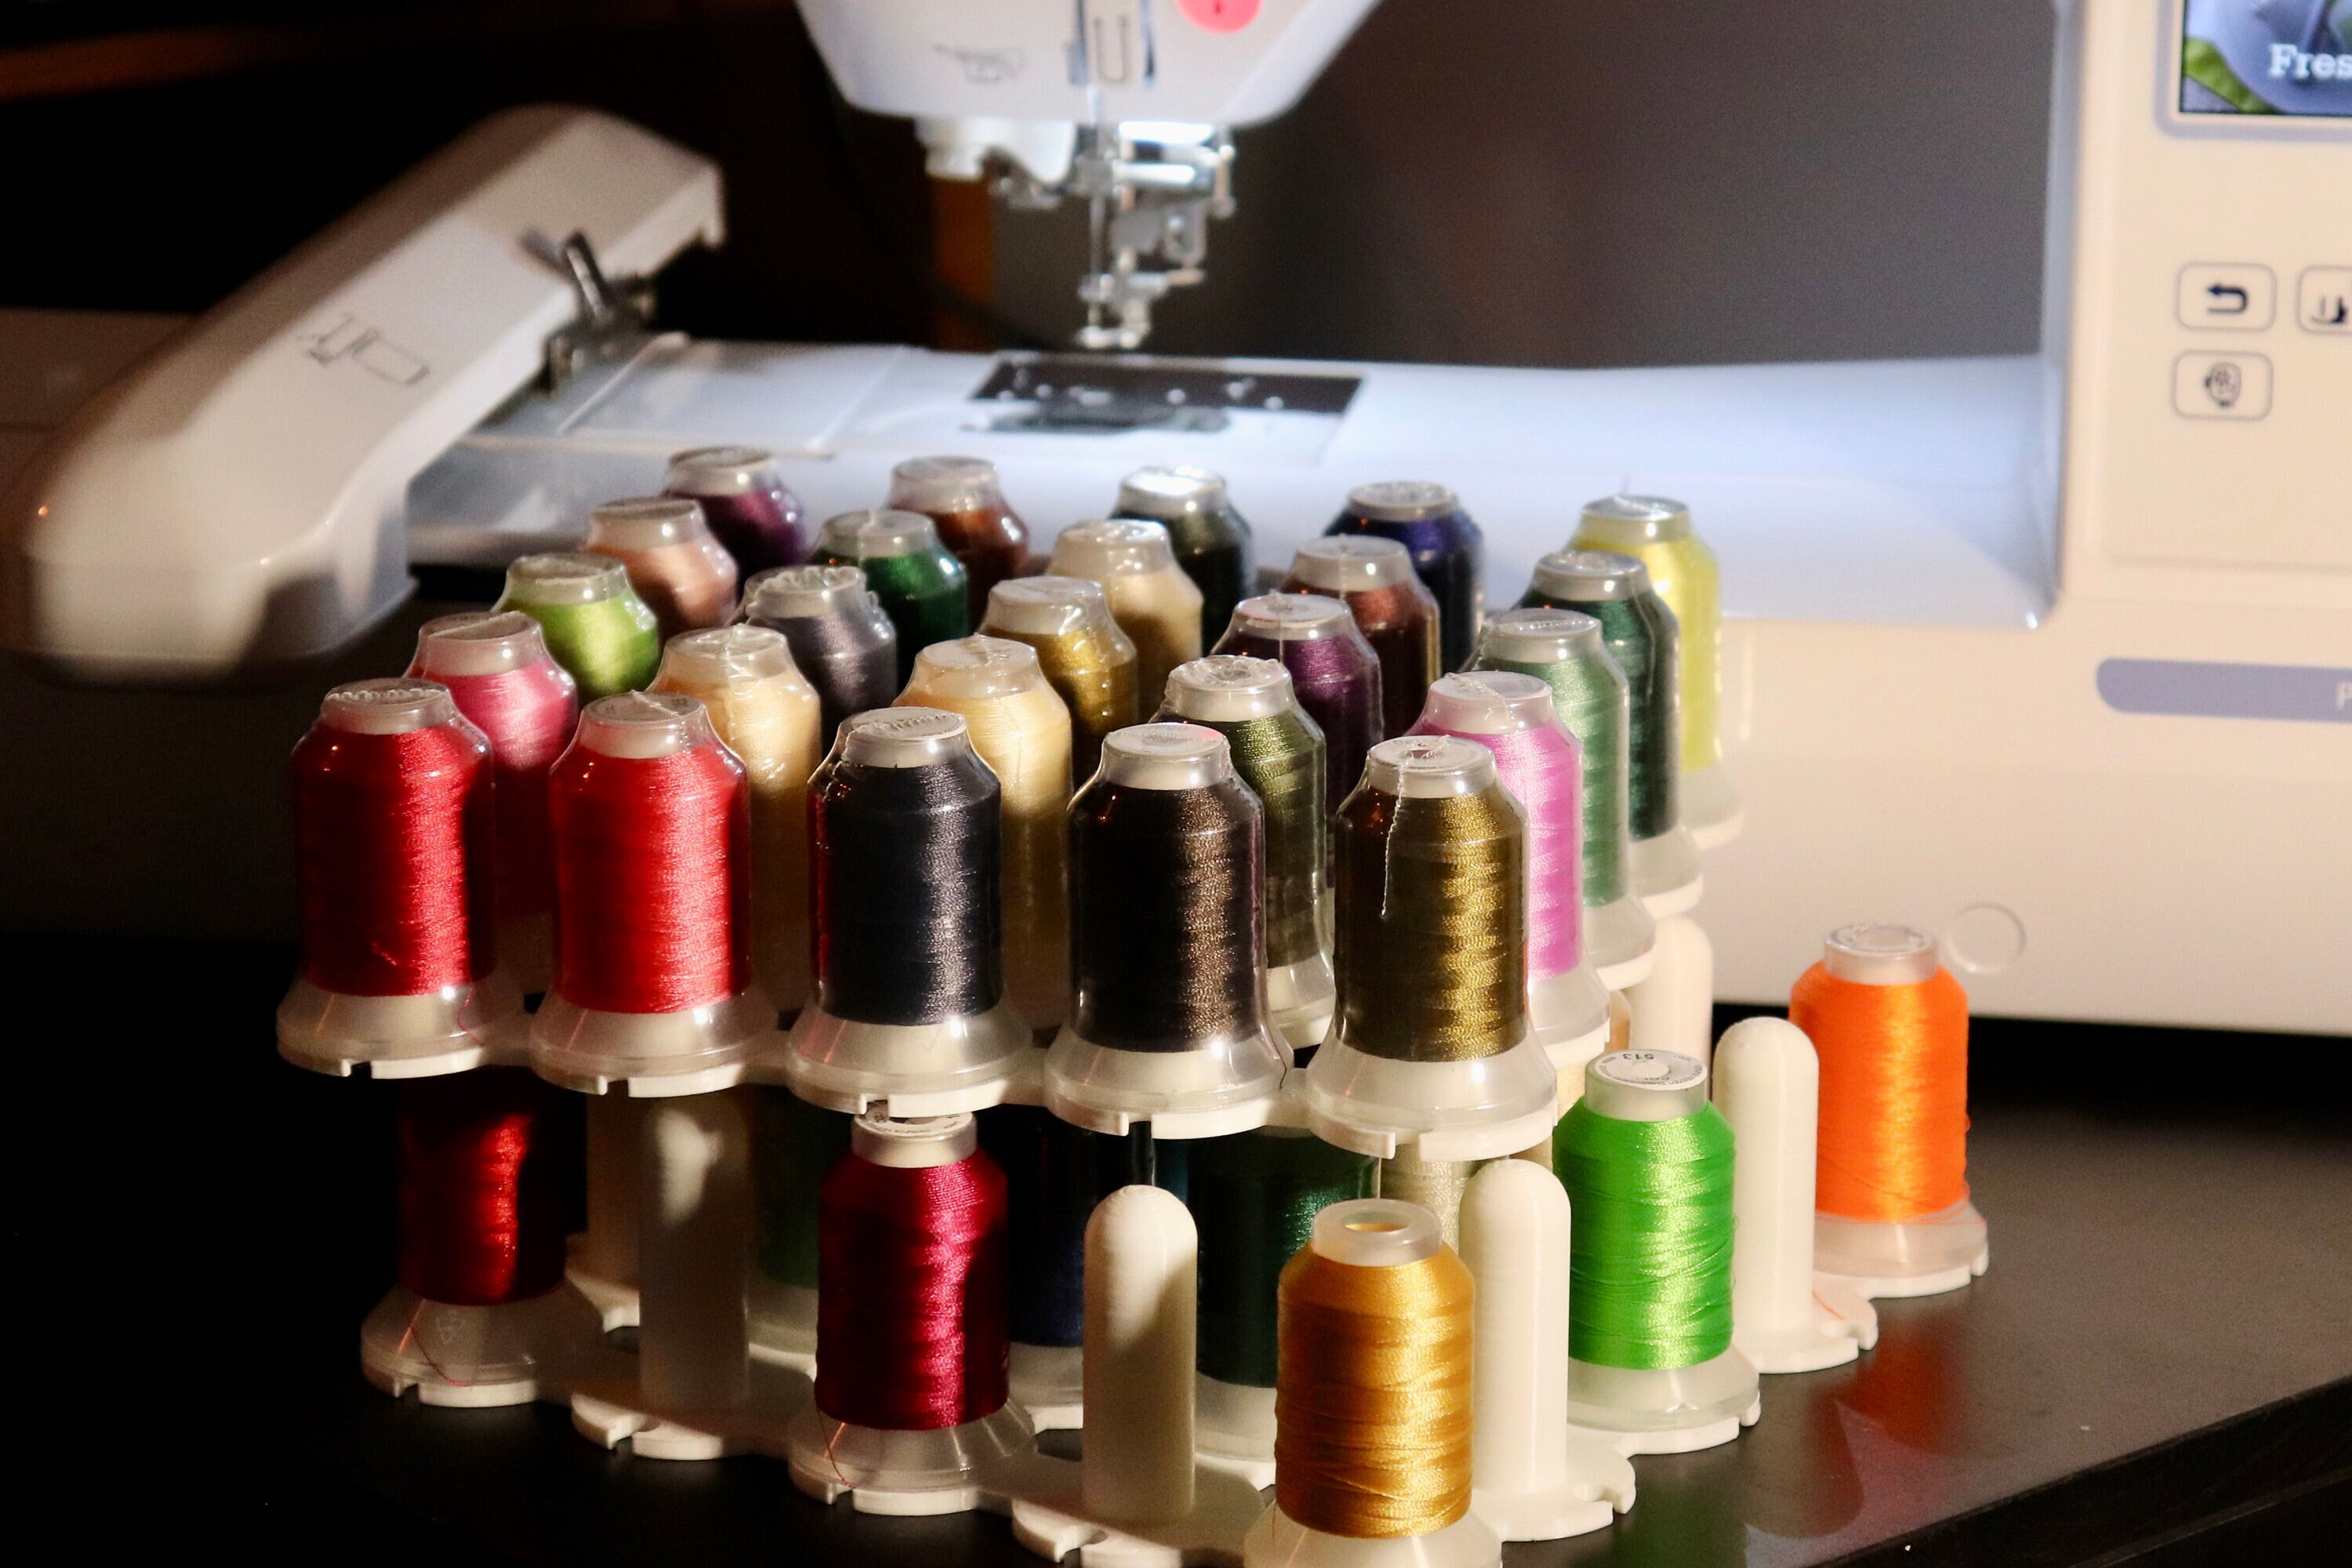 New brothread 63 Brother Colors Polyester Embroidery Machine Thread Kit  500M (550Y) Each Spool